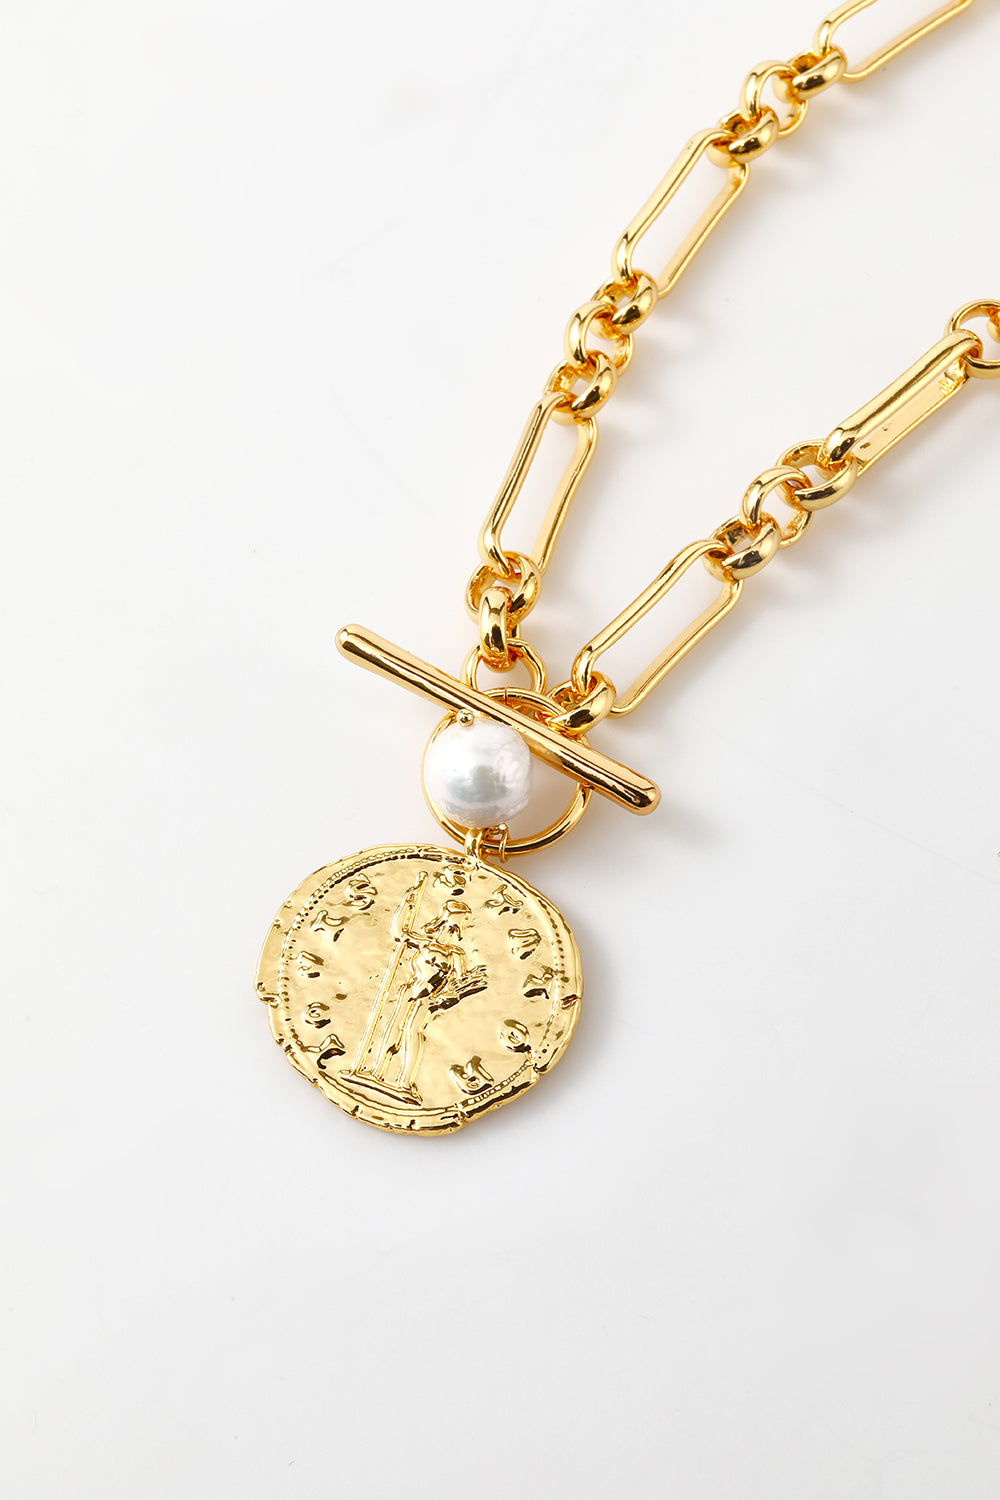 Golden Necklace With Pearl